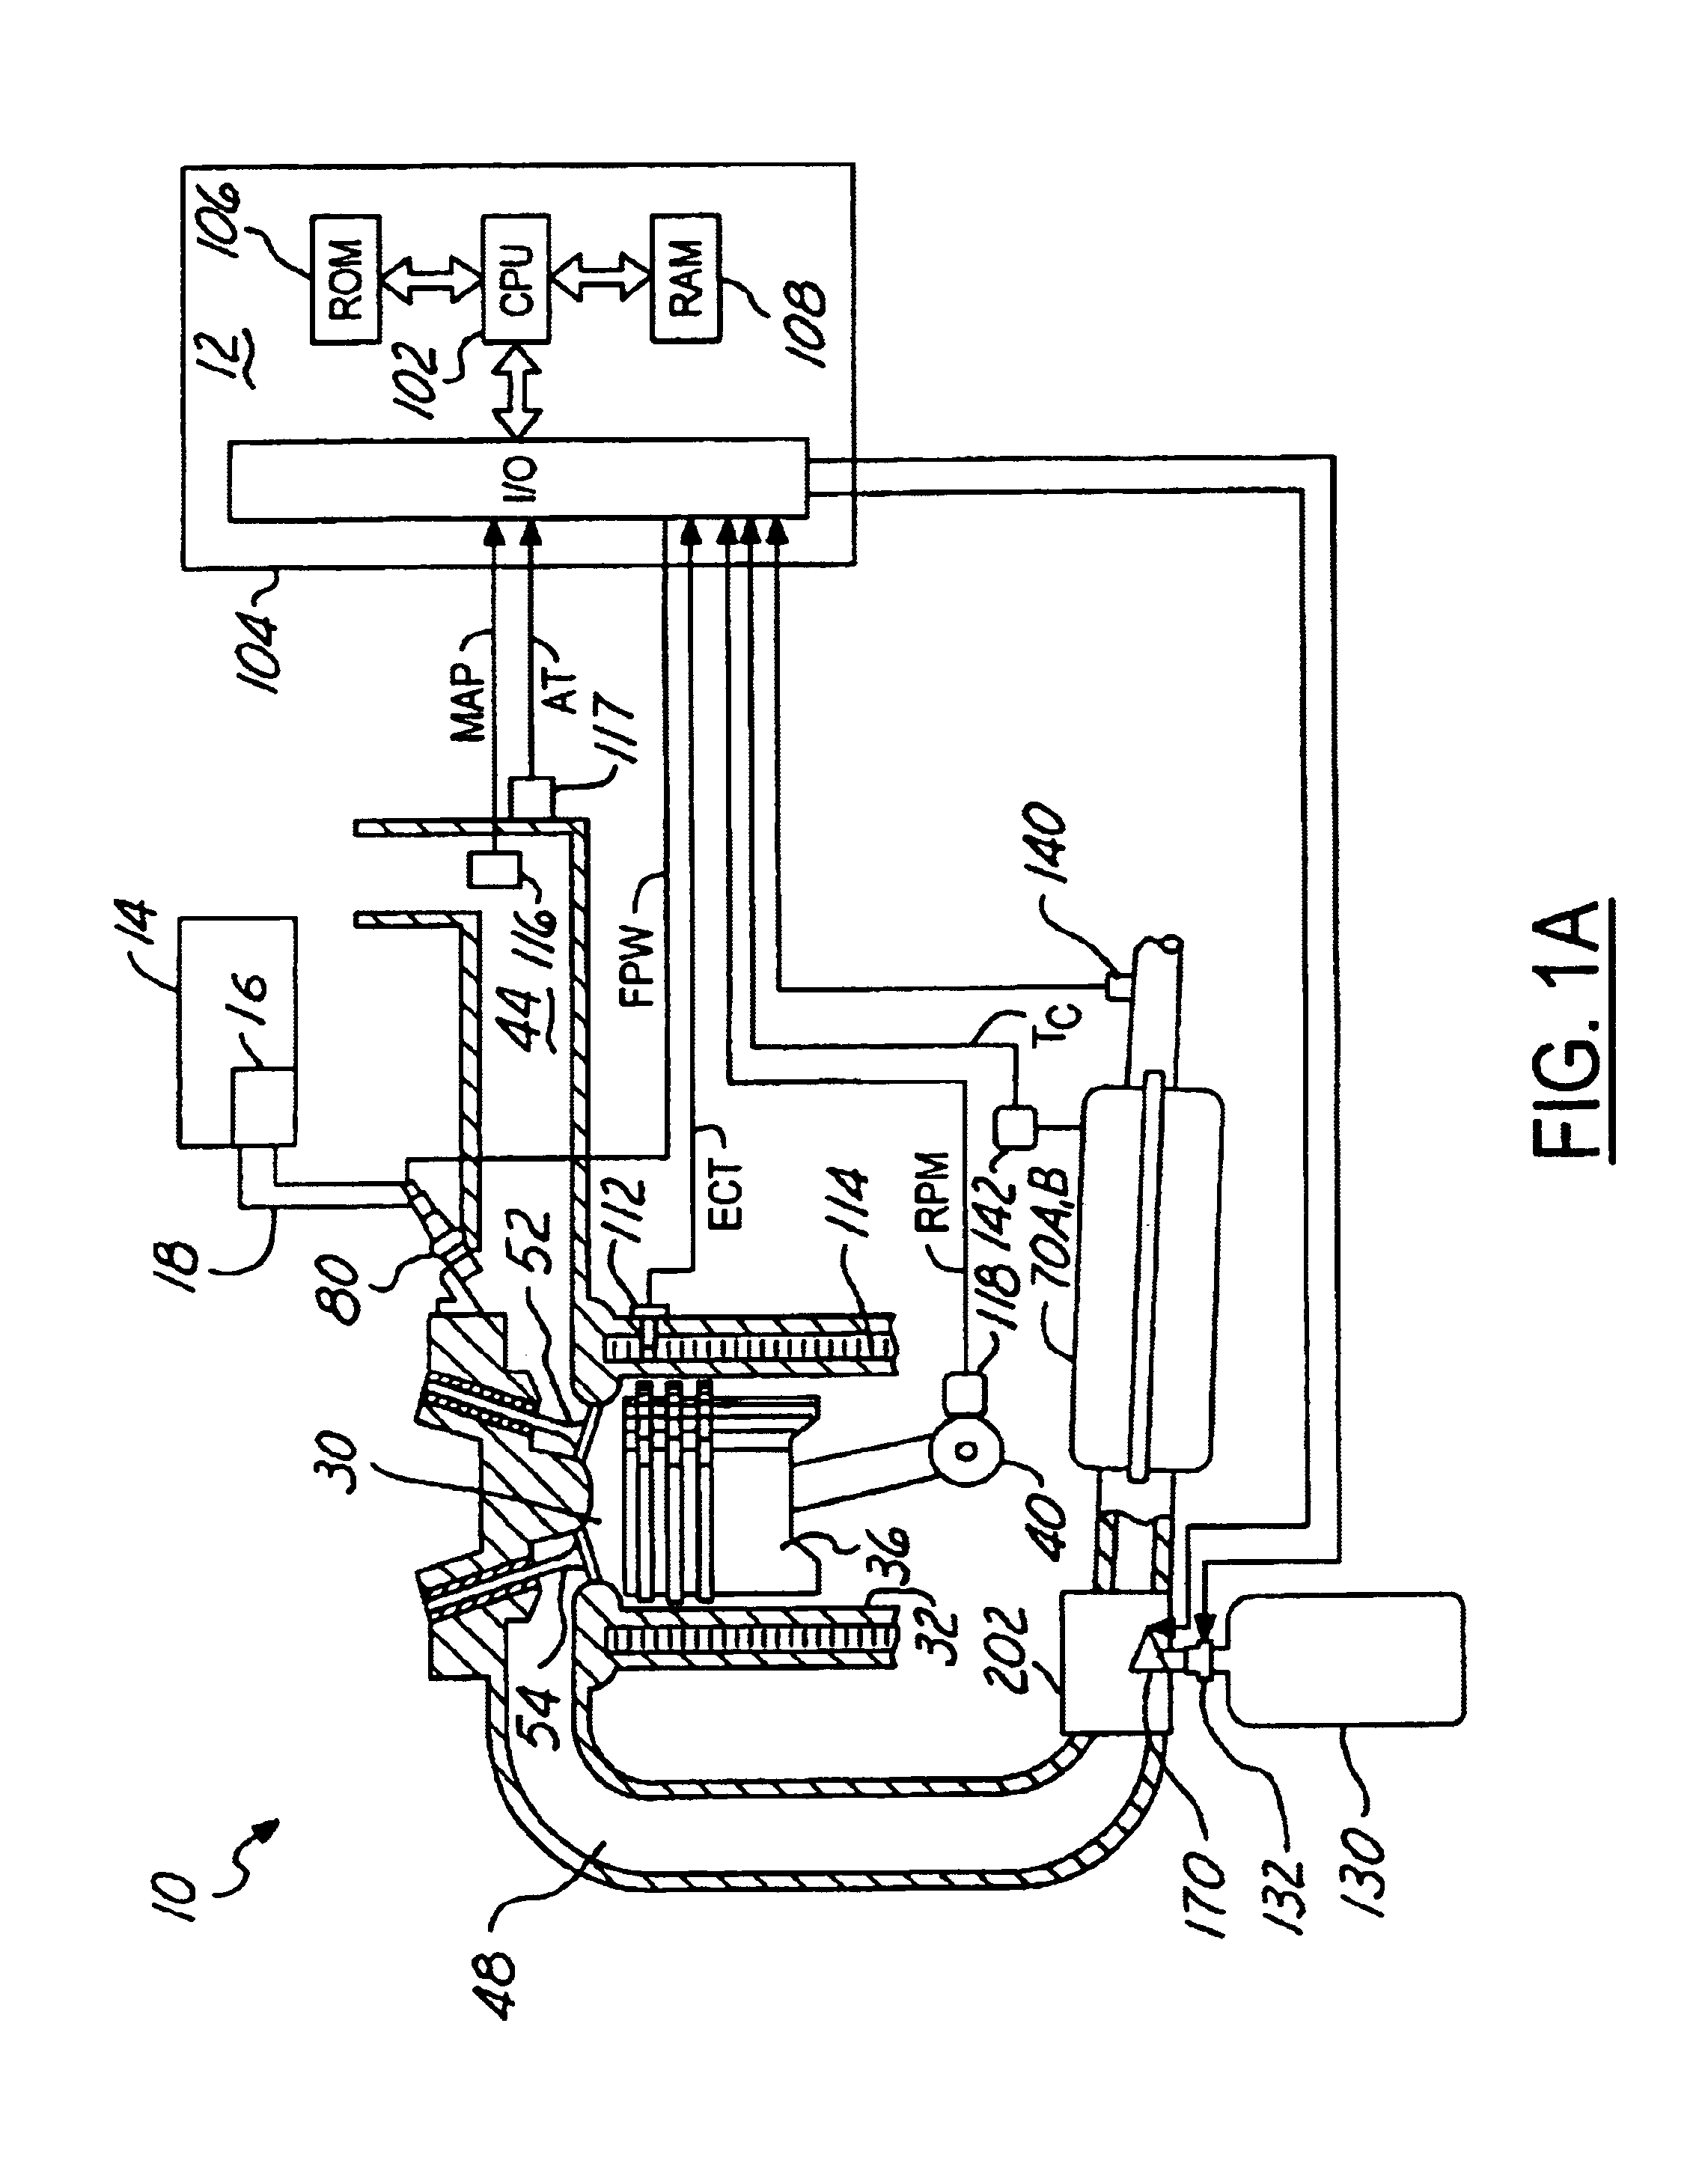 Diesel engine system for use with emission control device